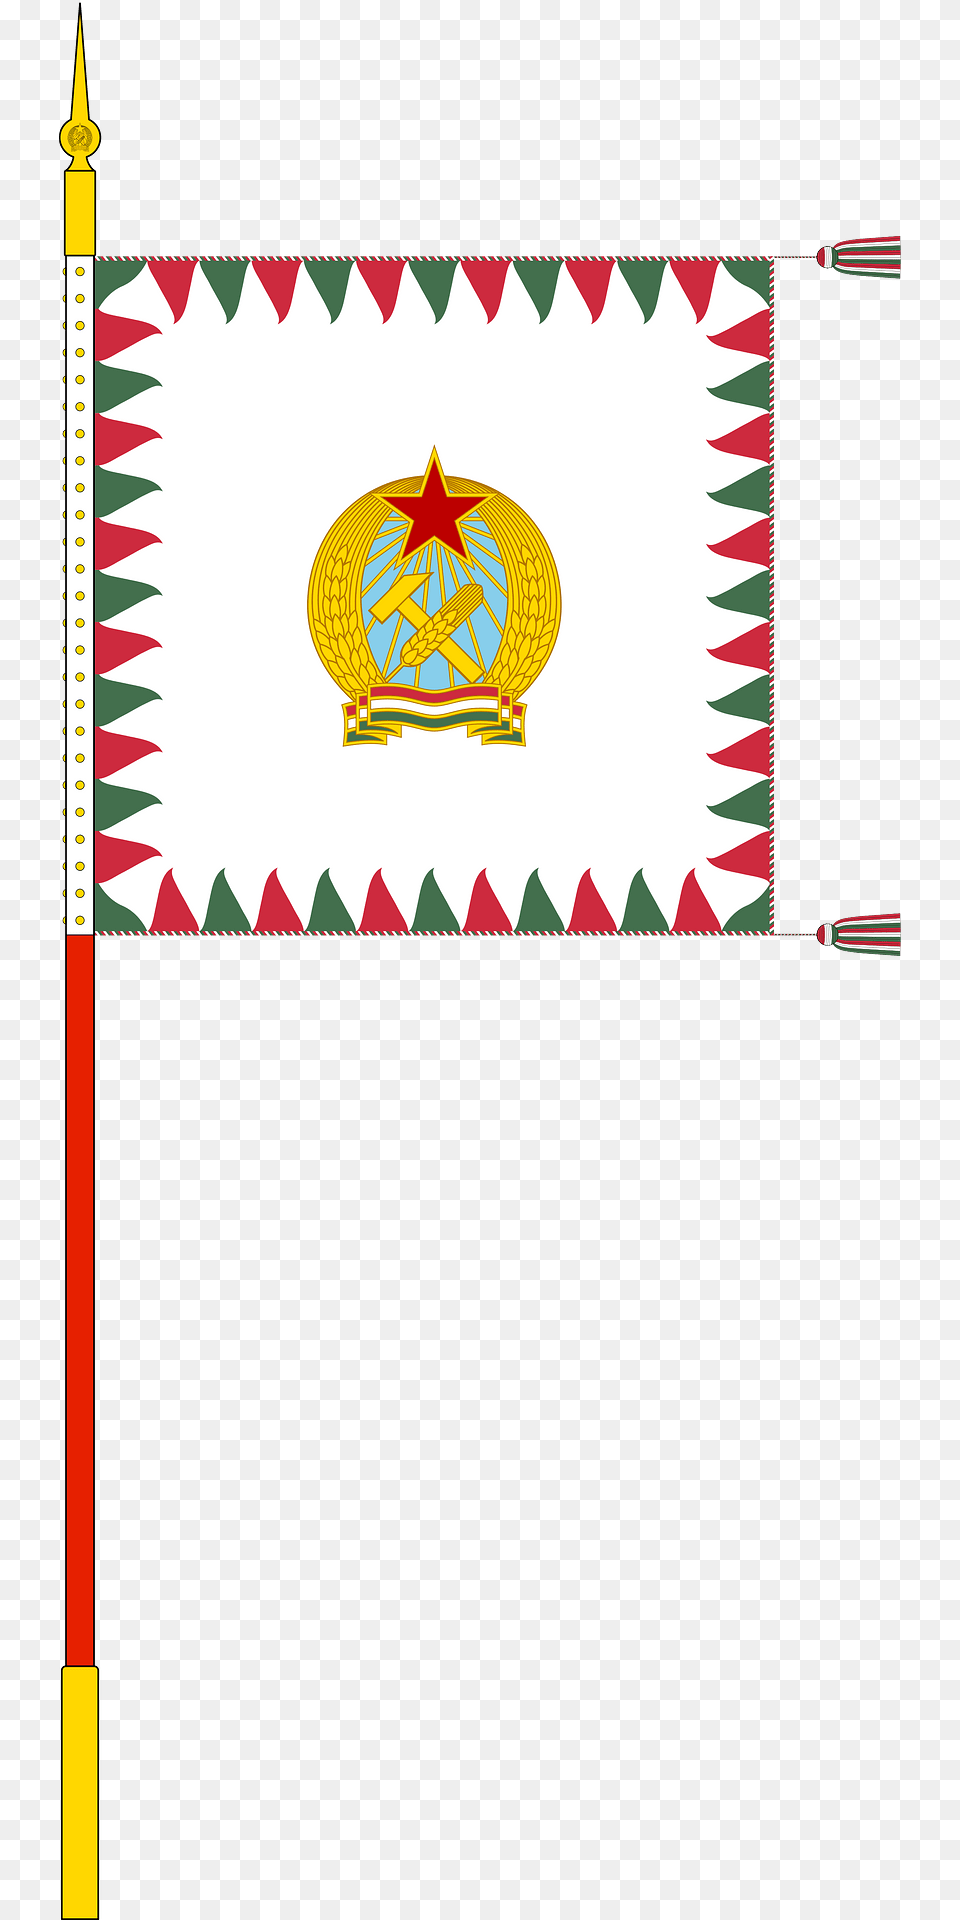 Standard For Motorised Rifle Regiments Of The Hungarian Defence Forces 1949 1950 With Staff Clipart Free Transparent Png